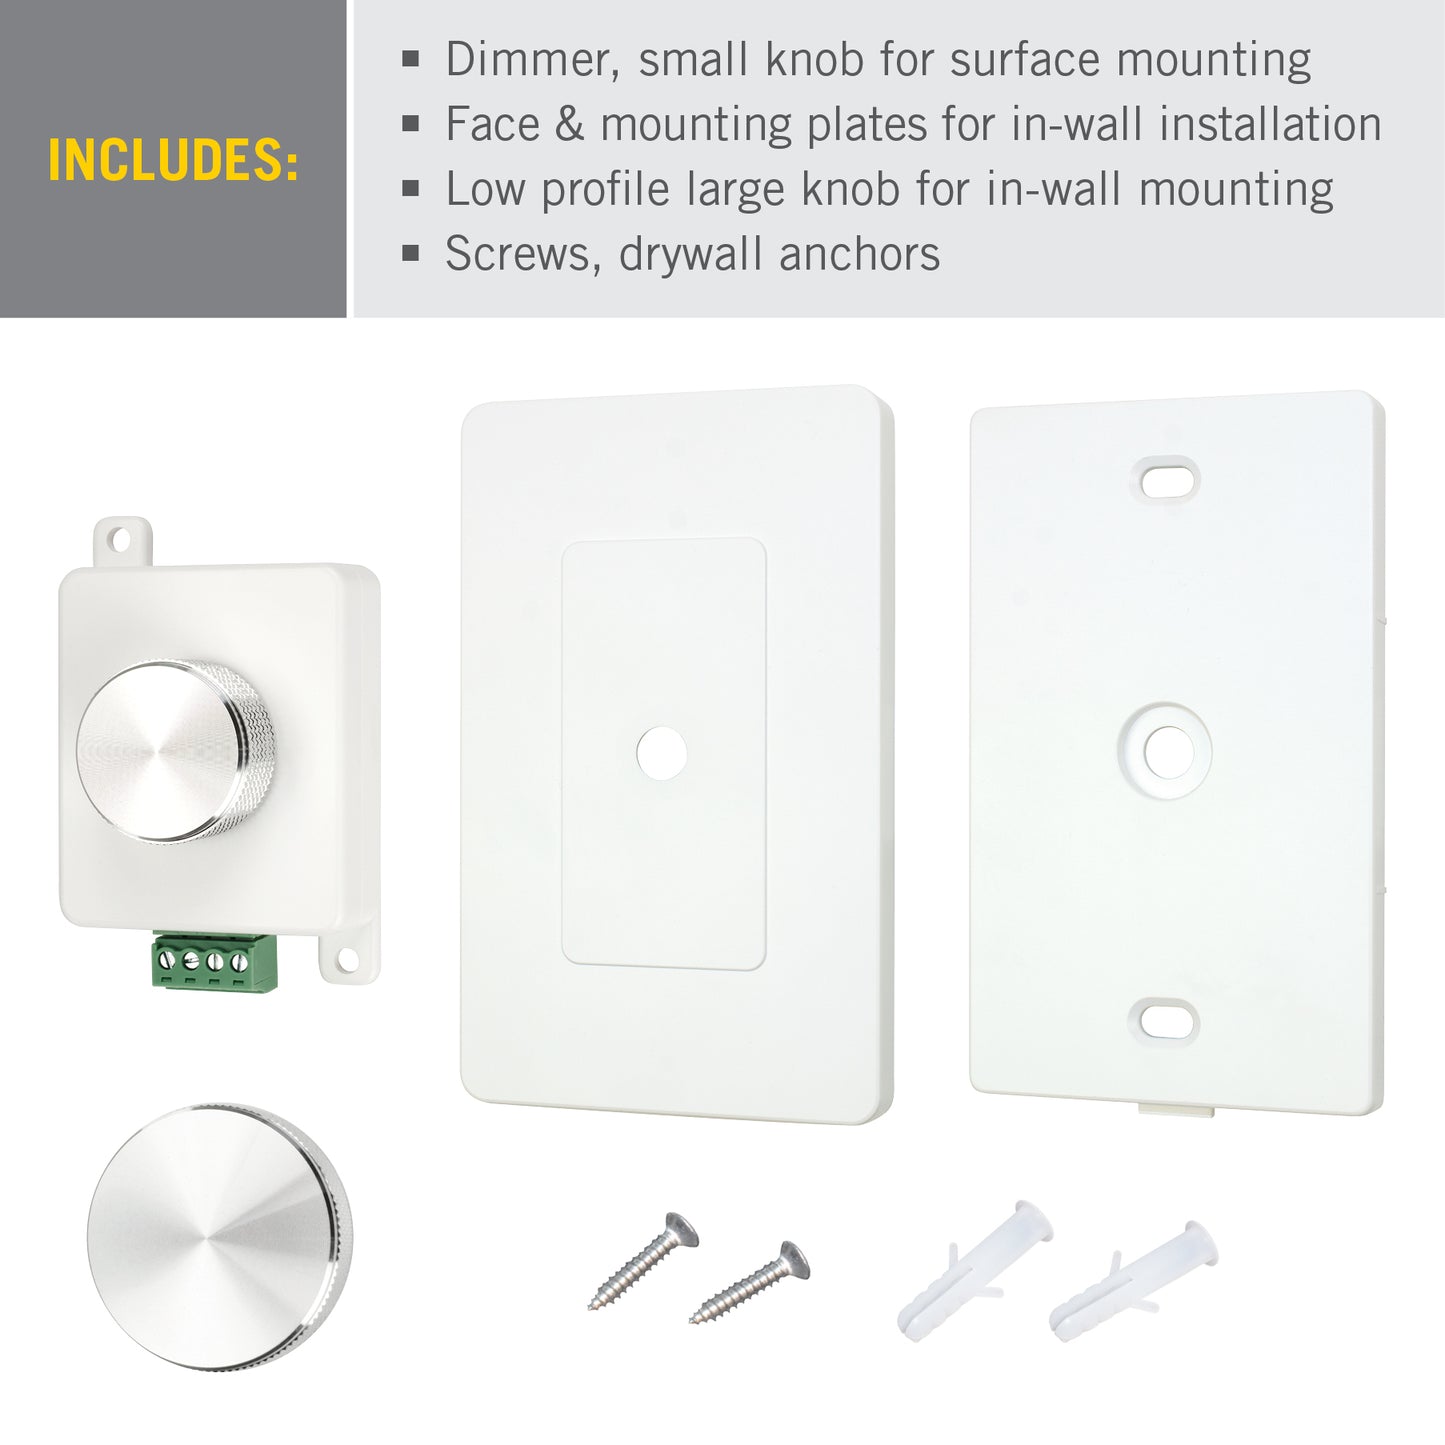 Armacost Lighting Rotary Knob LED Dimmer 511123 - The Home Depot